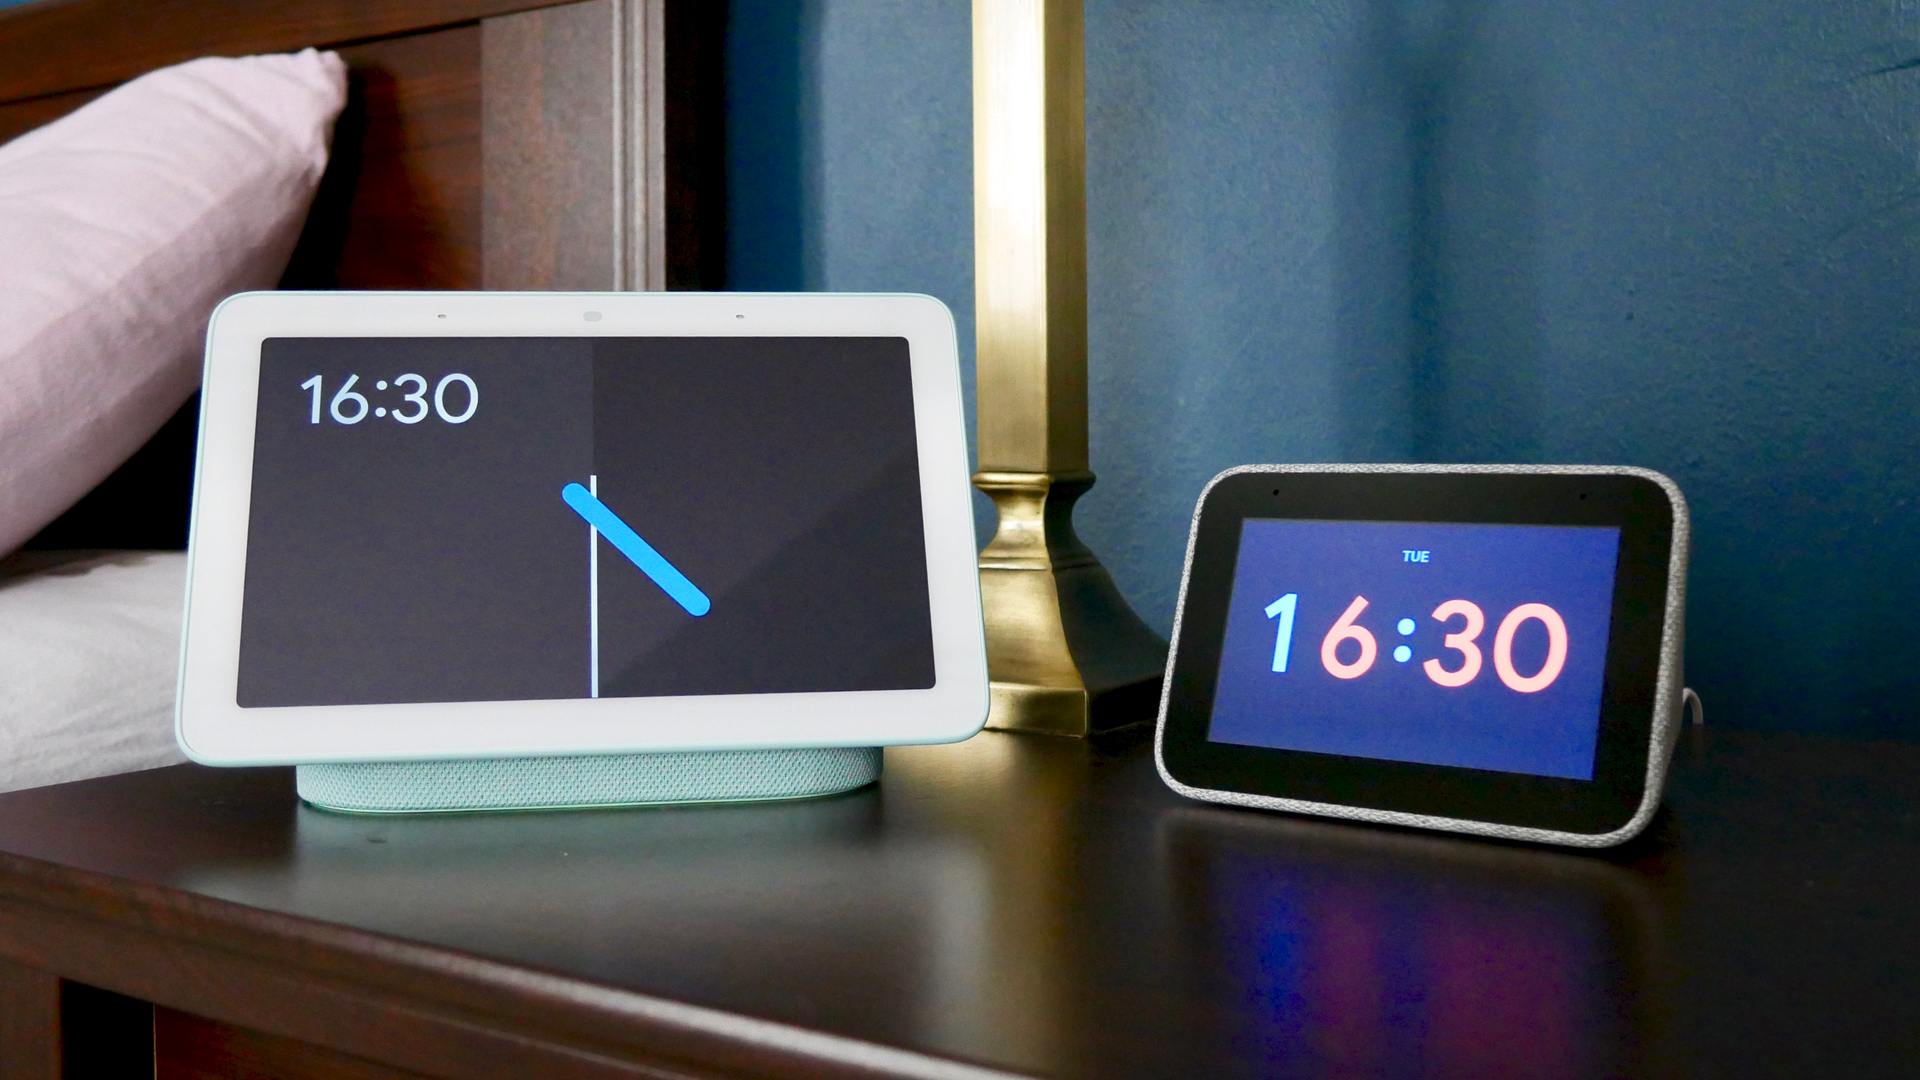 Google Nest Hub Max Smart Display with Google Assistant